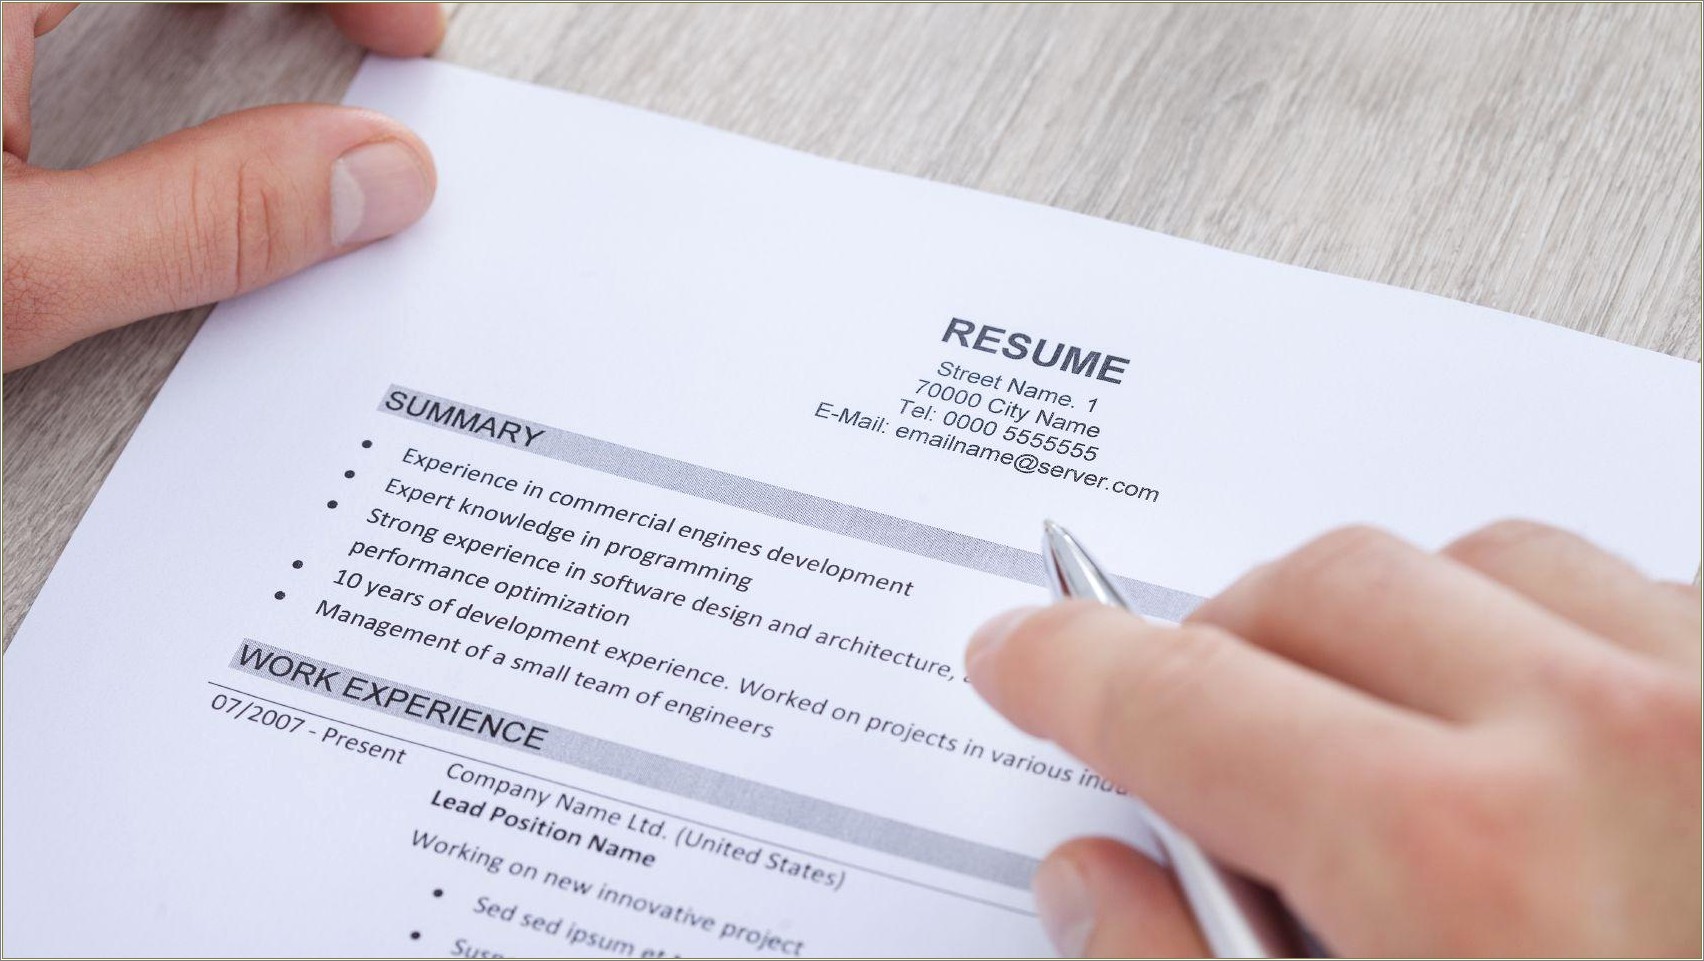 A Good Summary About Yourself For A Resume